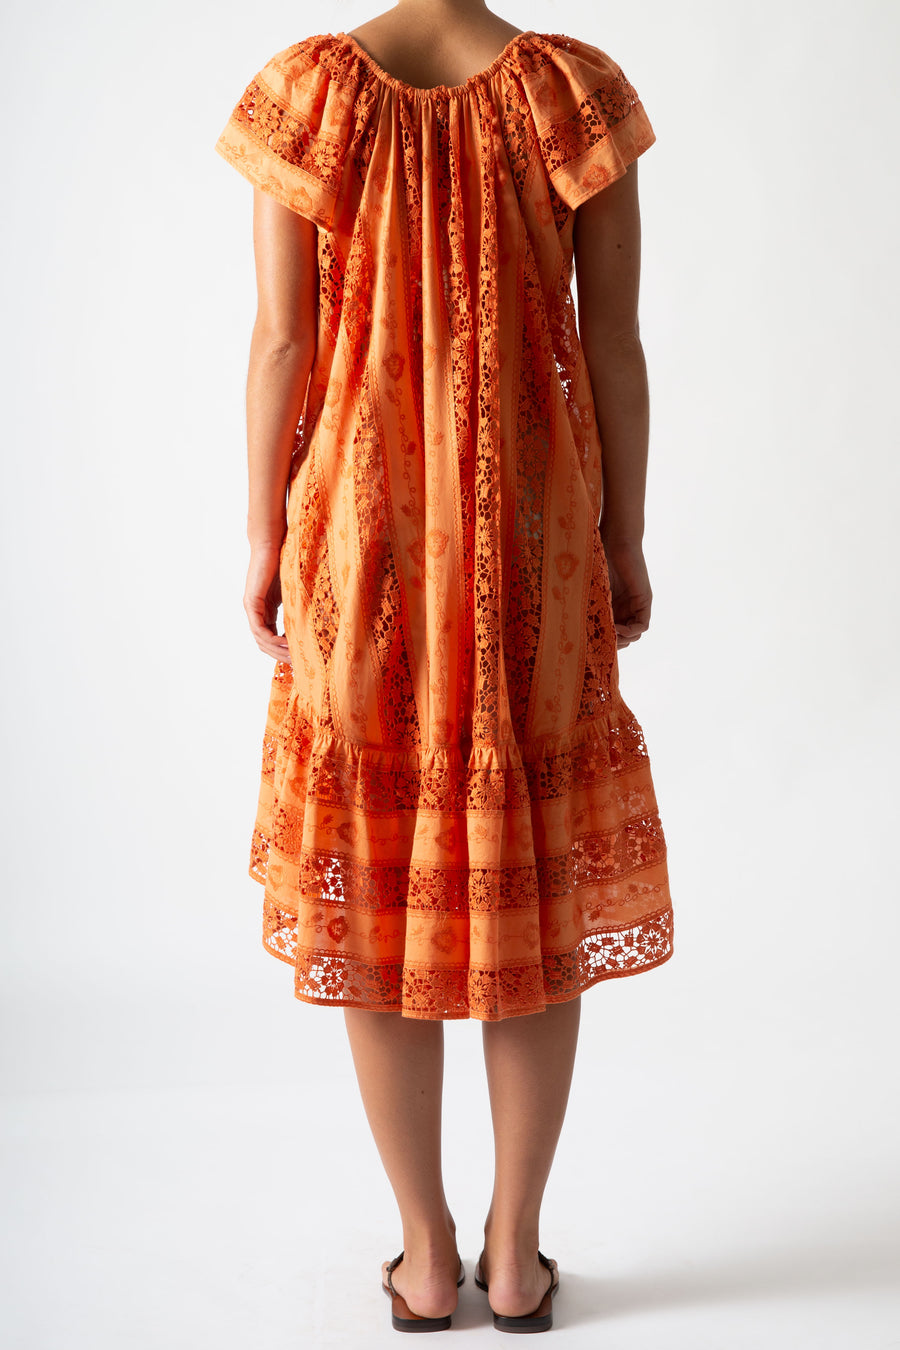 This is a back side photo of a woman wearing an orange embroidered cover up.